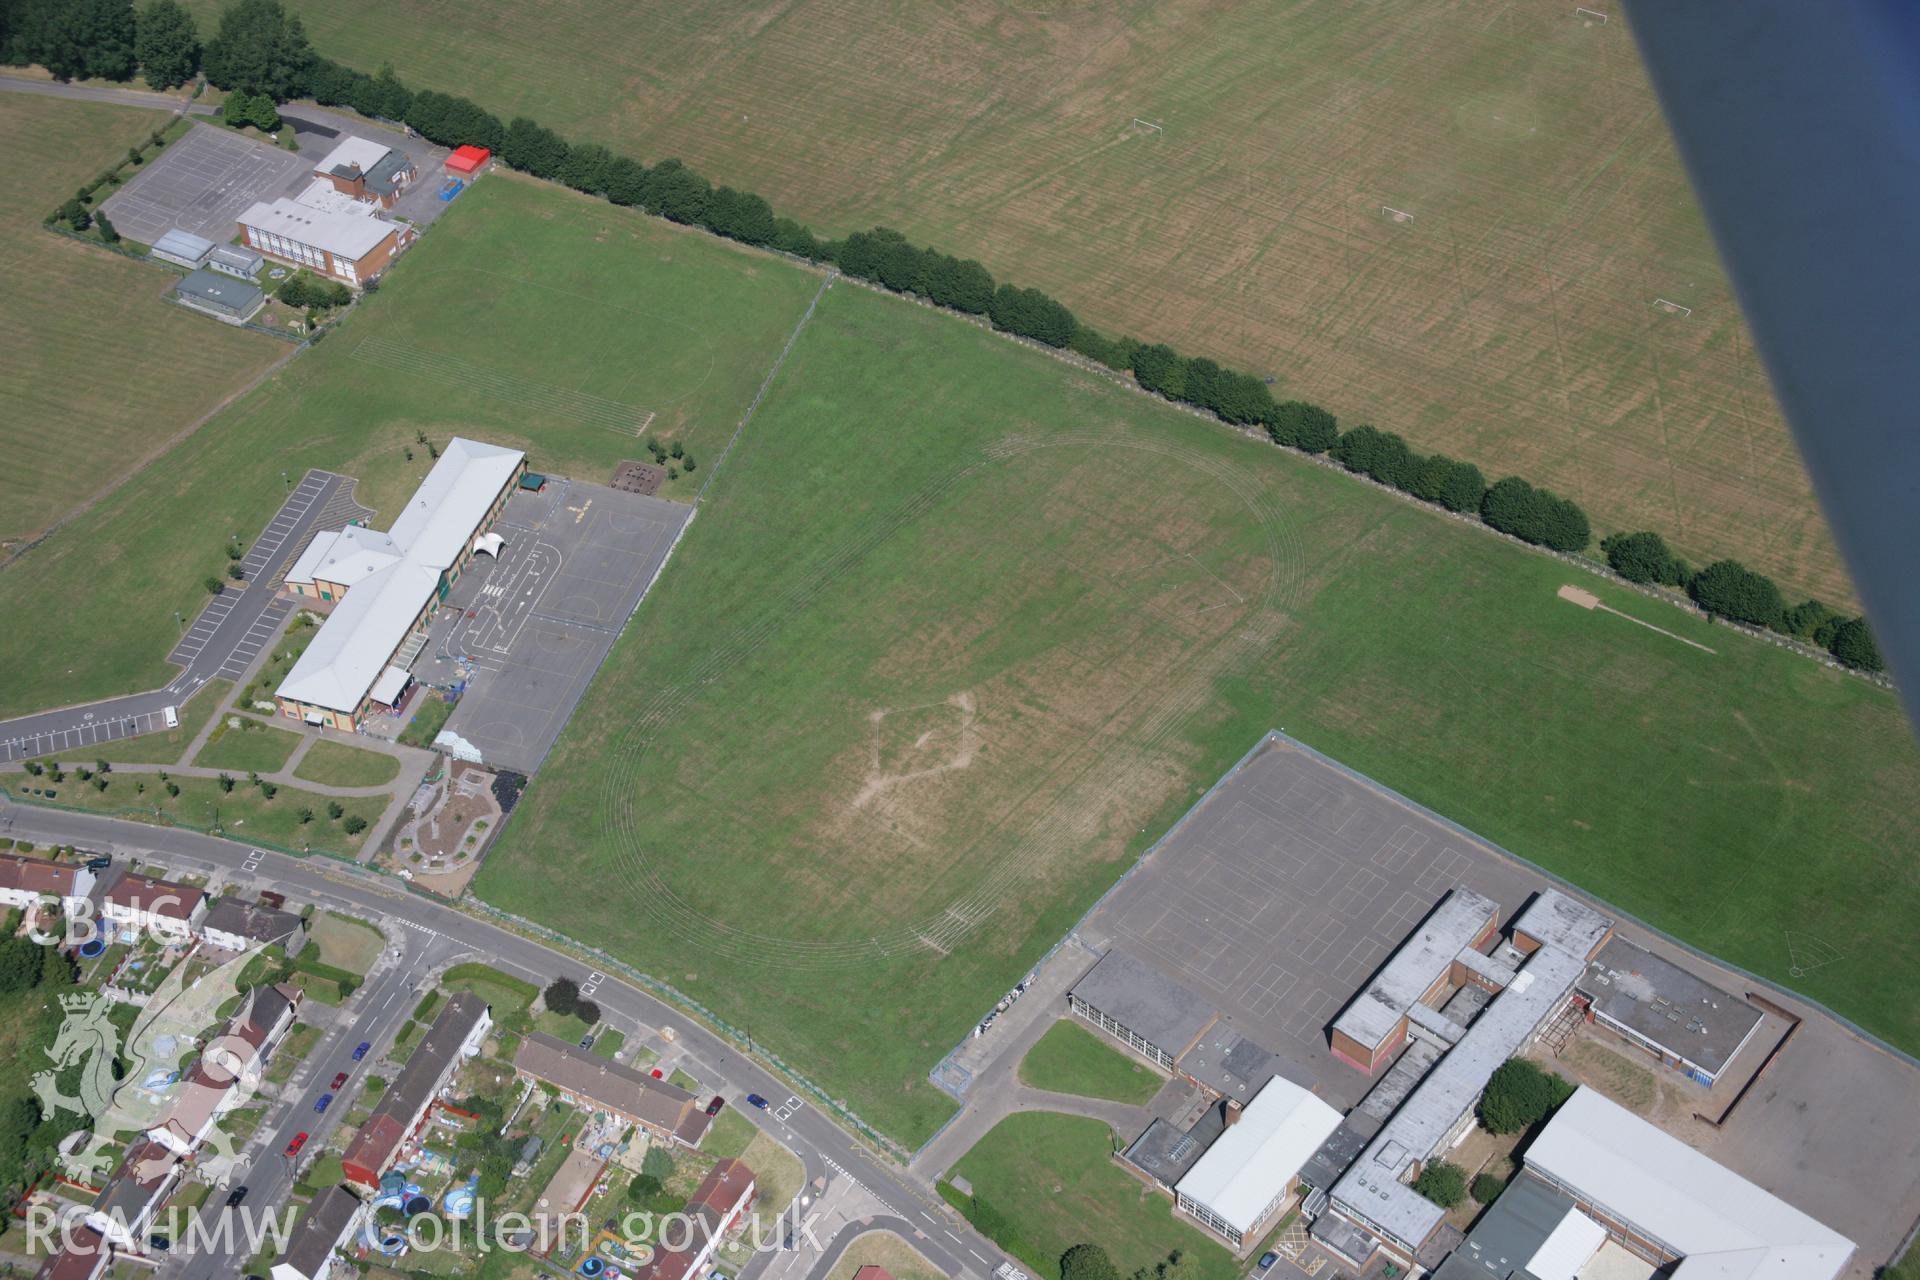 RCAHMW colour oblique aerial photograph of school near Ely Roman Villa. Taken on 24 July 2006 by Toby Driver